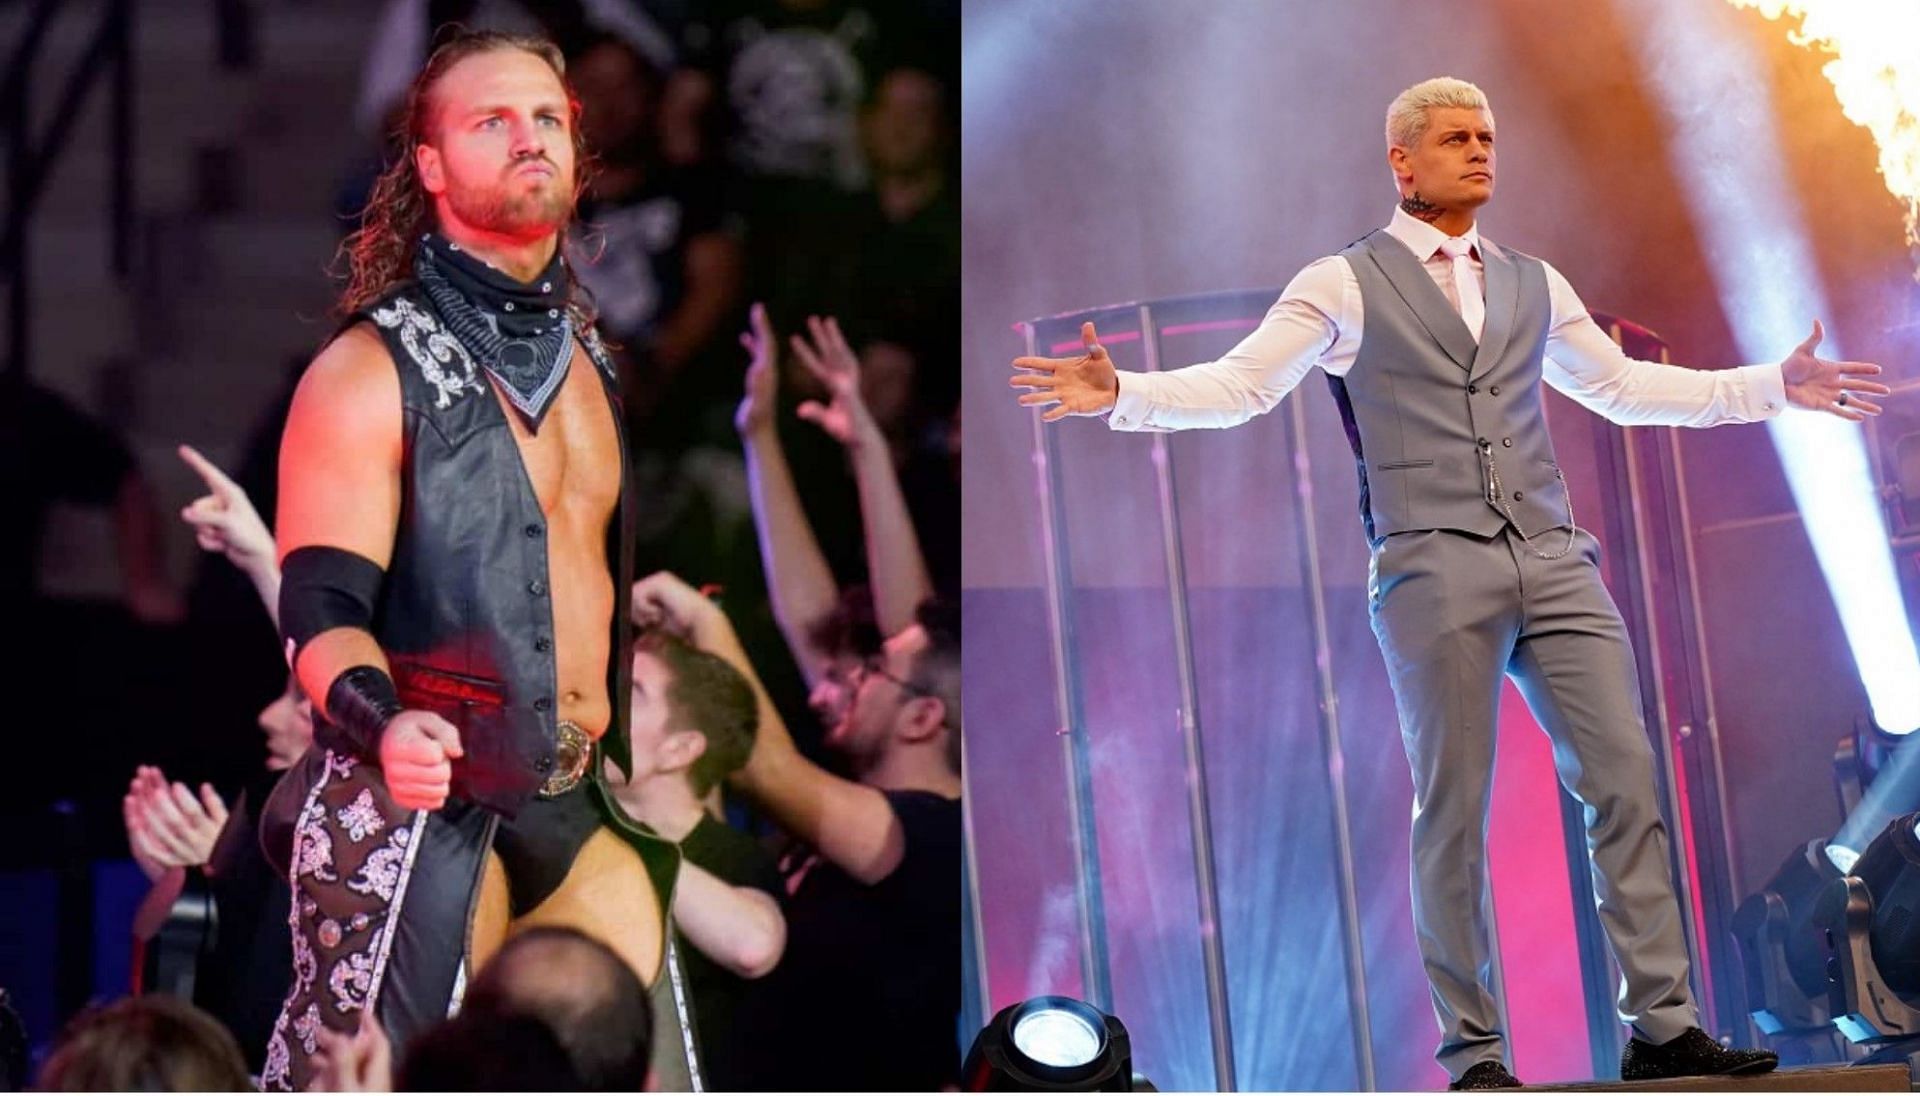 Hangman Page (left) and Cody Rhodes (right)